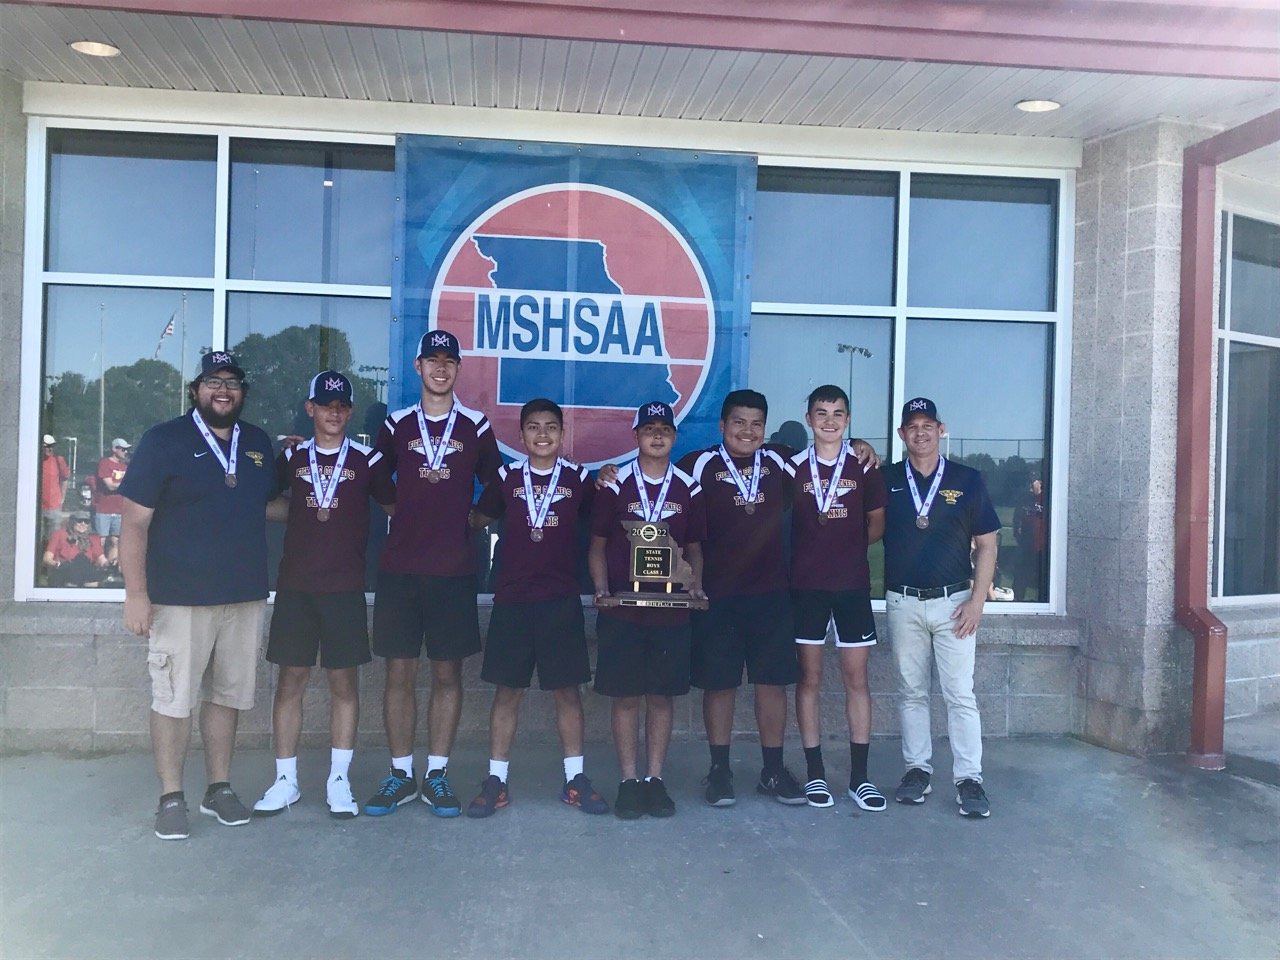 The Missouri Military Academy tennis team poses with its fourth-place state plaque (its first Final Four since 1992) on May 27 at the Class 1 state tournament in Springfield. Pictured, from left, are head coach Brad Smith, Gorka Yarte-Zertuche, Luis Orozco-Navarro, Samuel Way, Jose Anguiano, Simon Way, Nathan Dempsey and assistant coach Tom Allen.